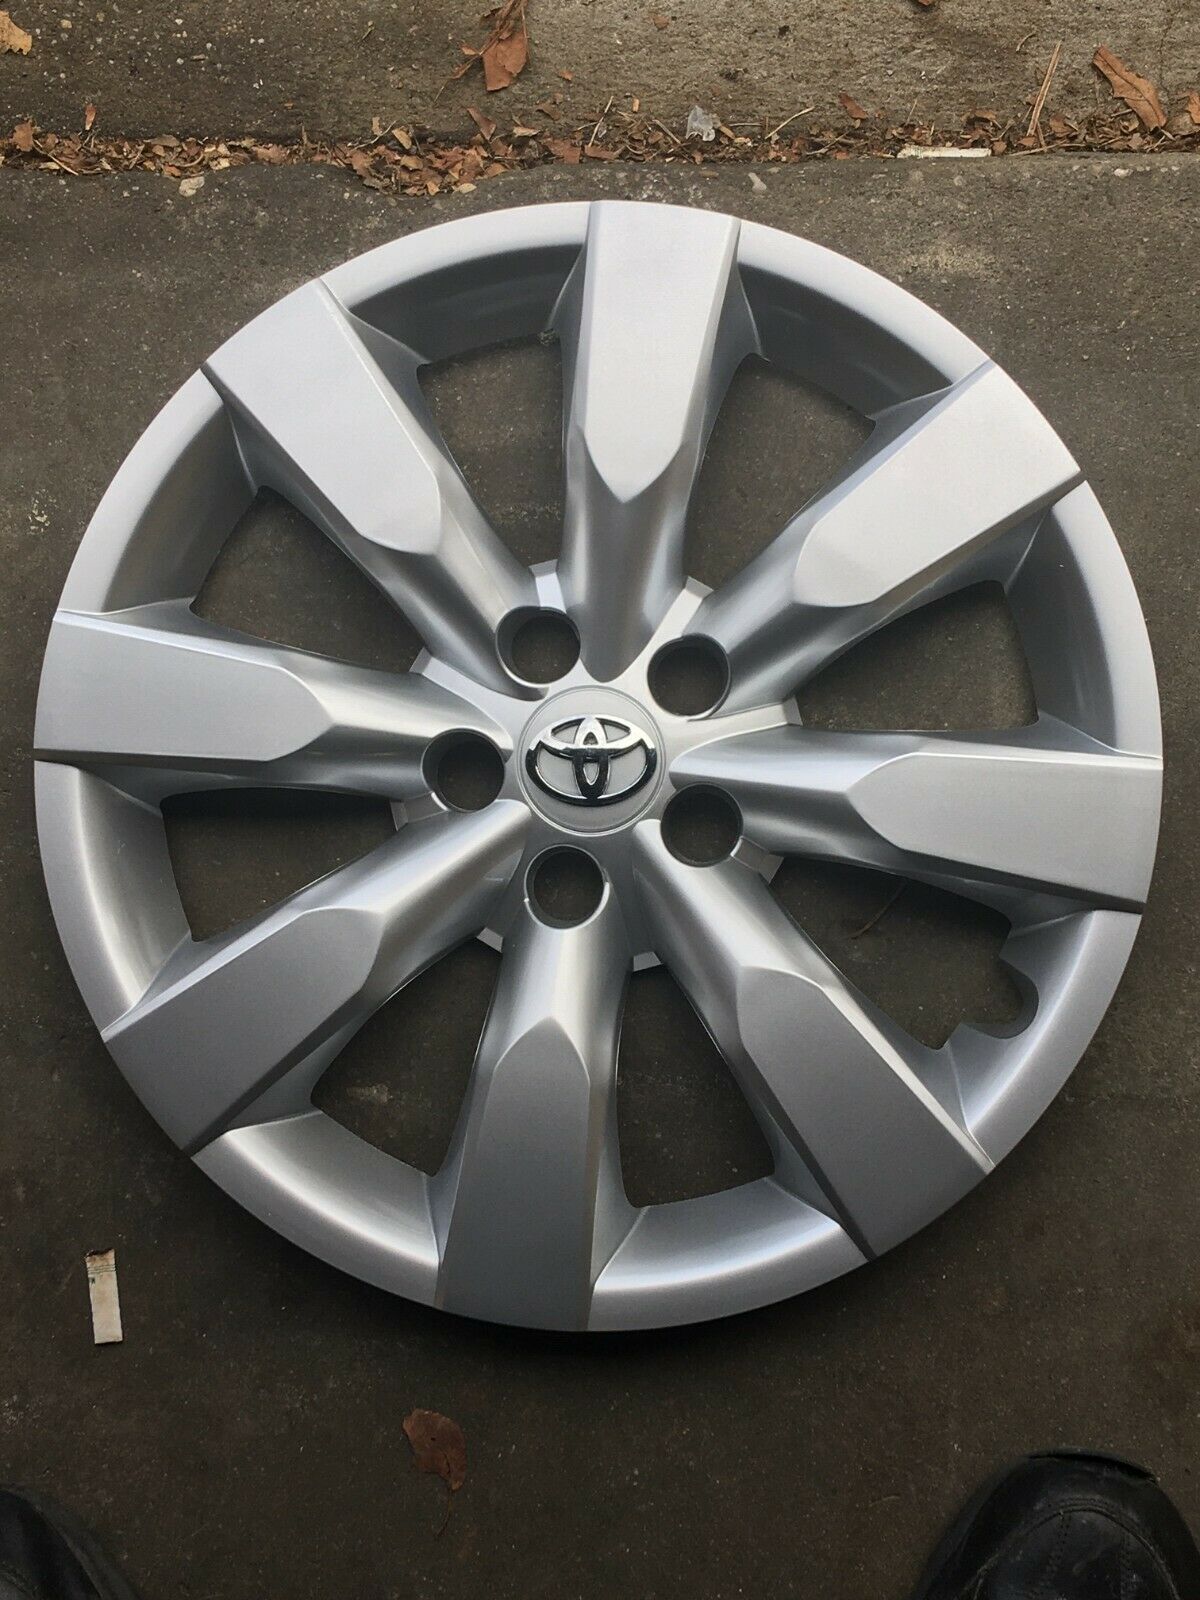 1x Replacement For 2014 2015 2016 Toyota Corolla 16 Inch Hubcap 61172